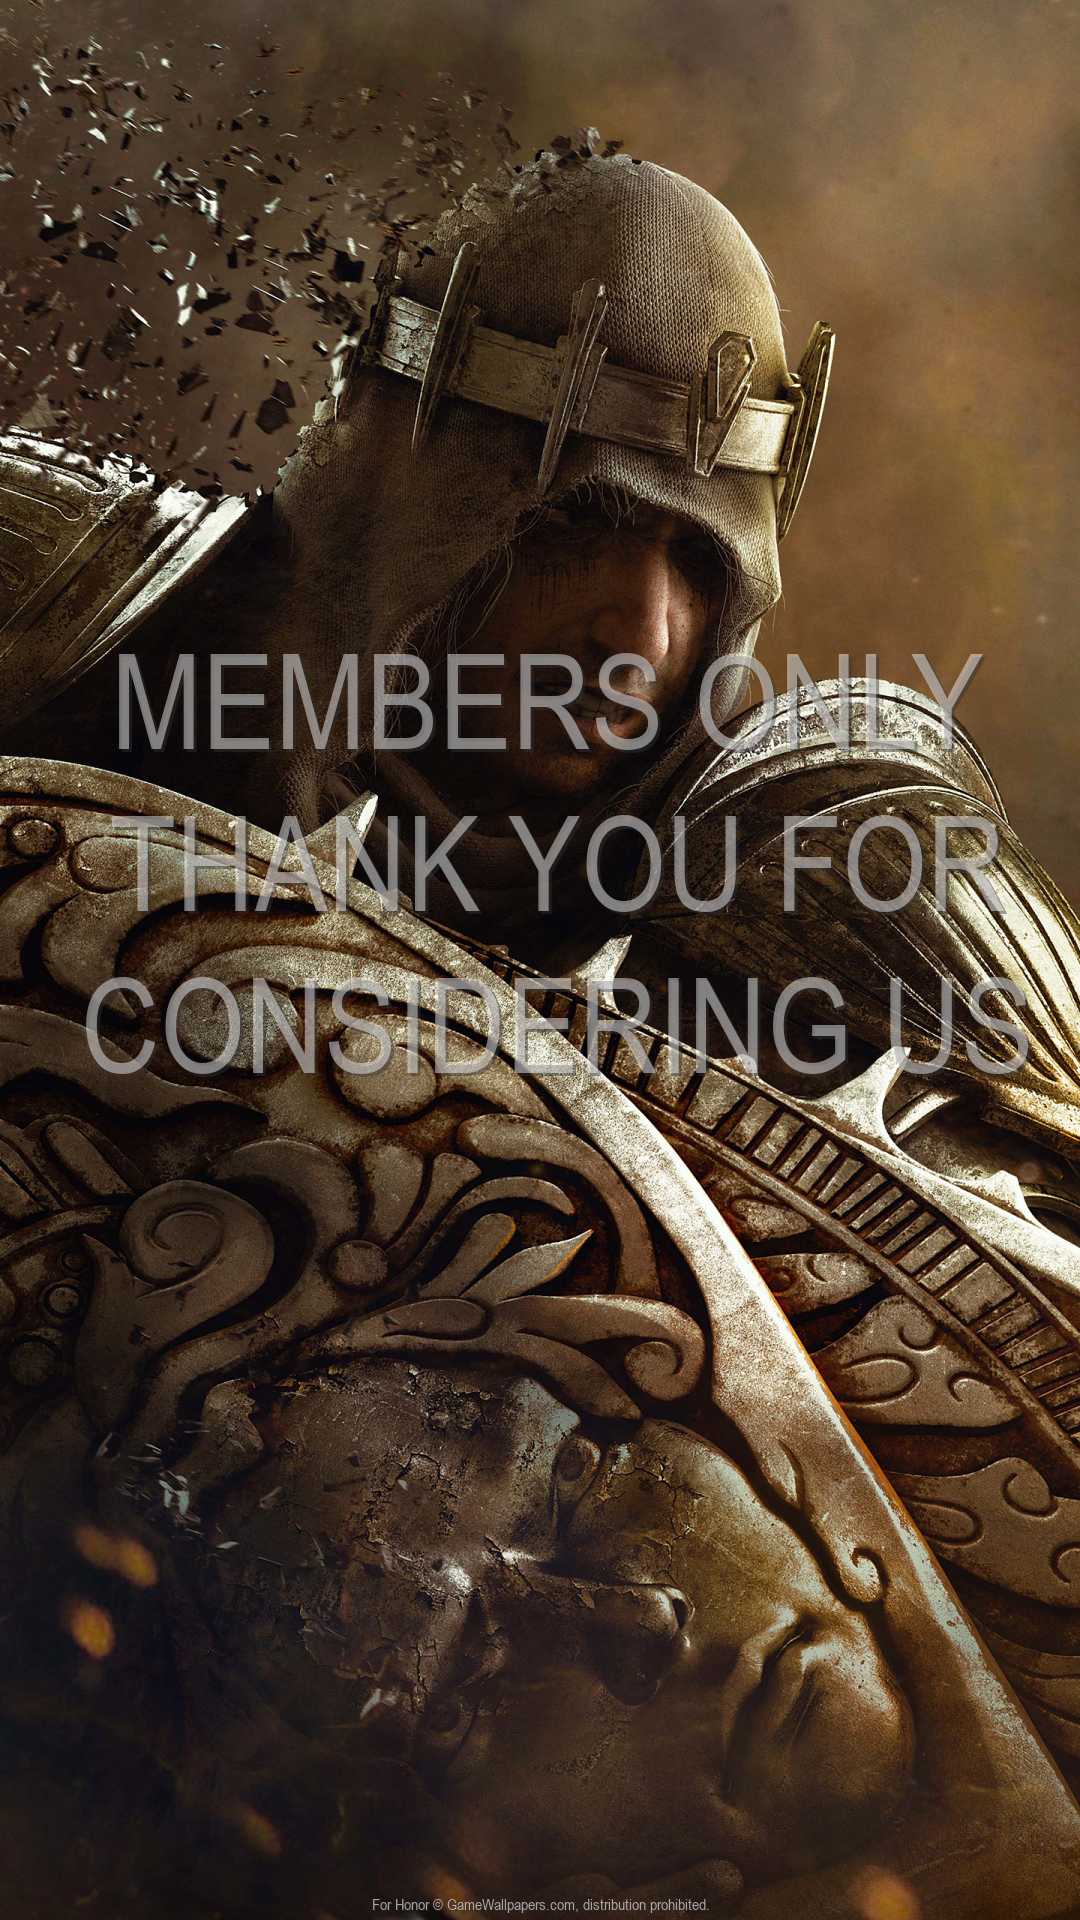 For Honor 1080p Vertical Mobile wallpaper or background 19